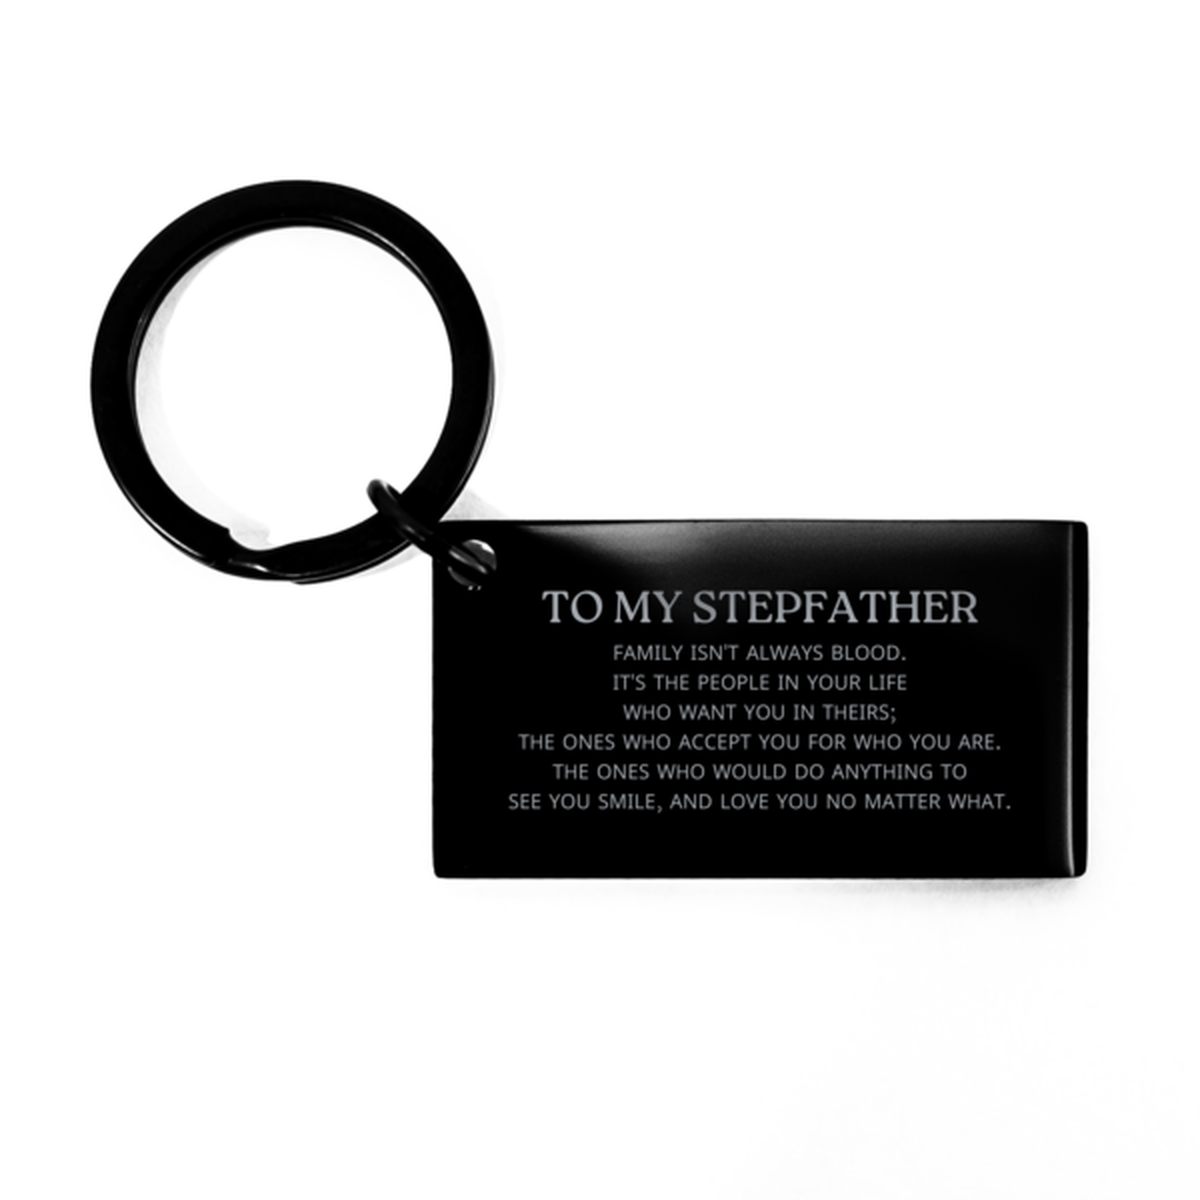 To My Stepfather Gifts, Family isn't always blood, Stepfather Keychain, Birthday Christmas Unique Present For Stepfather